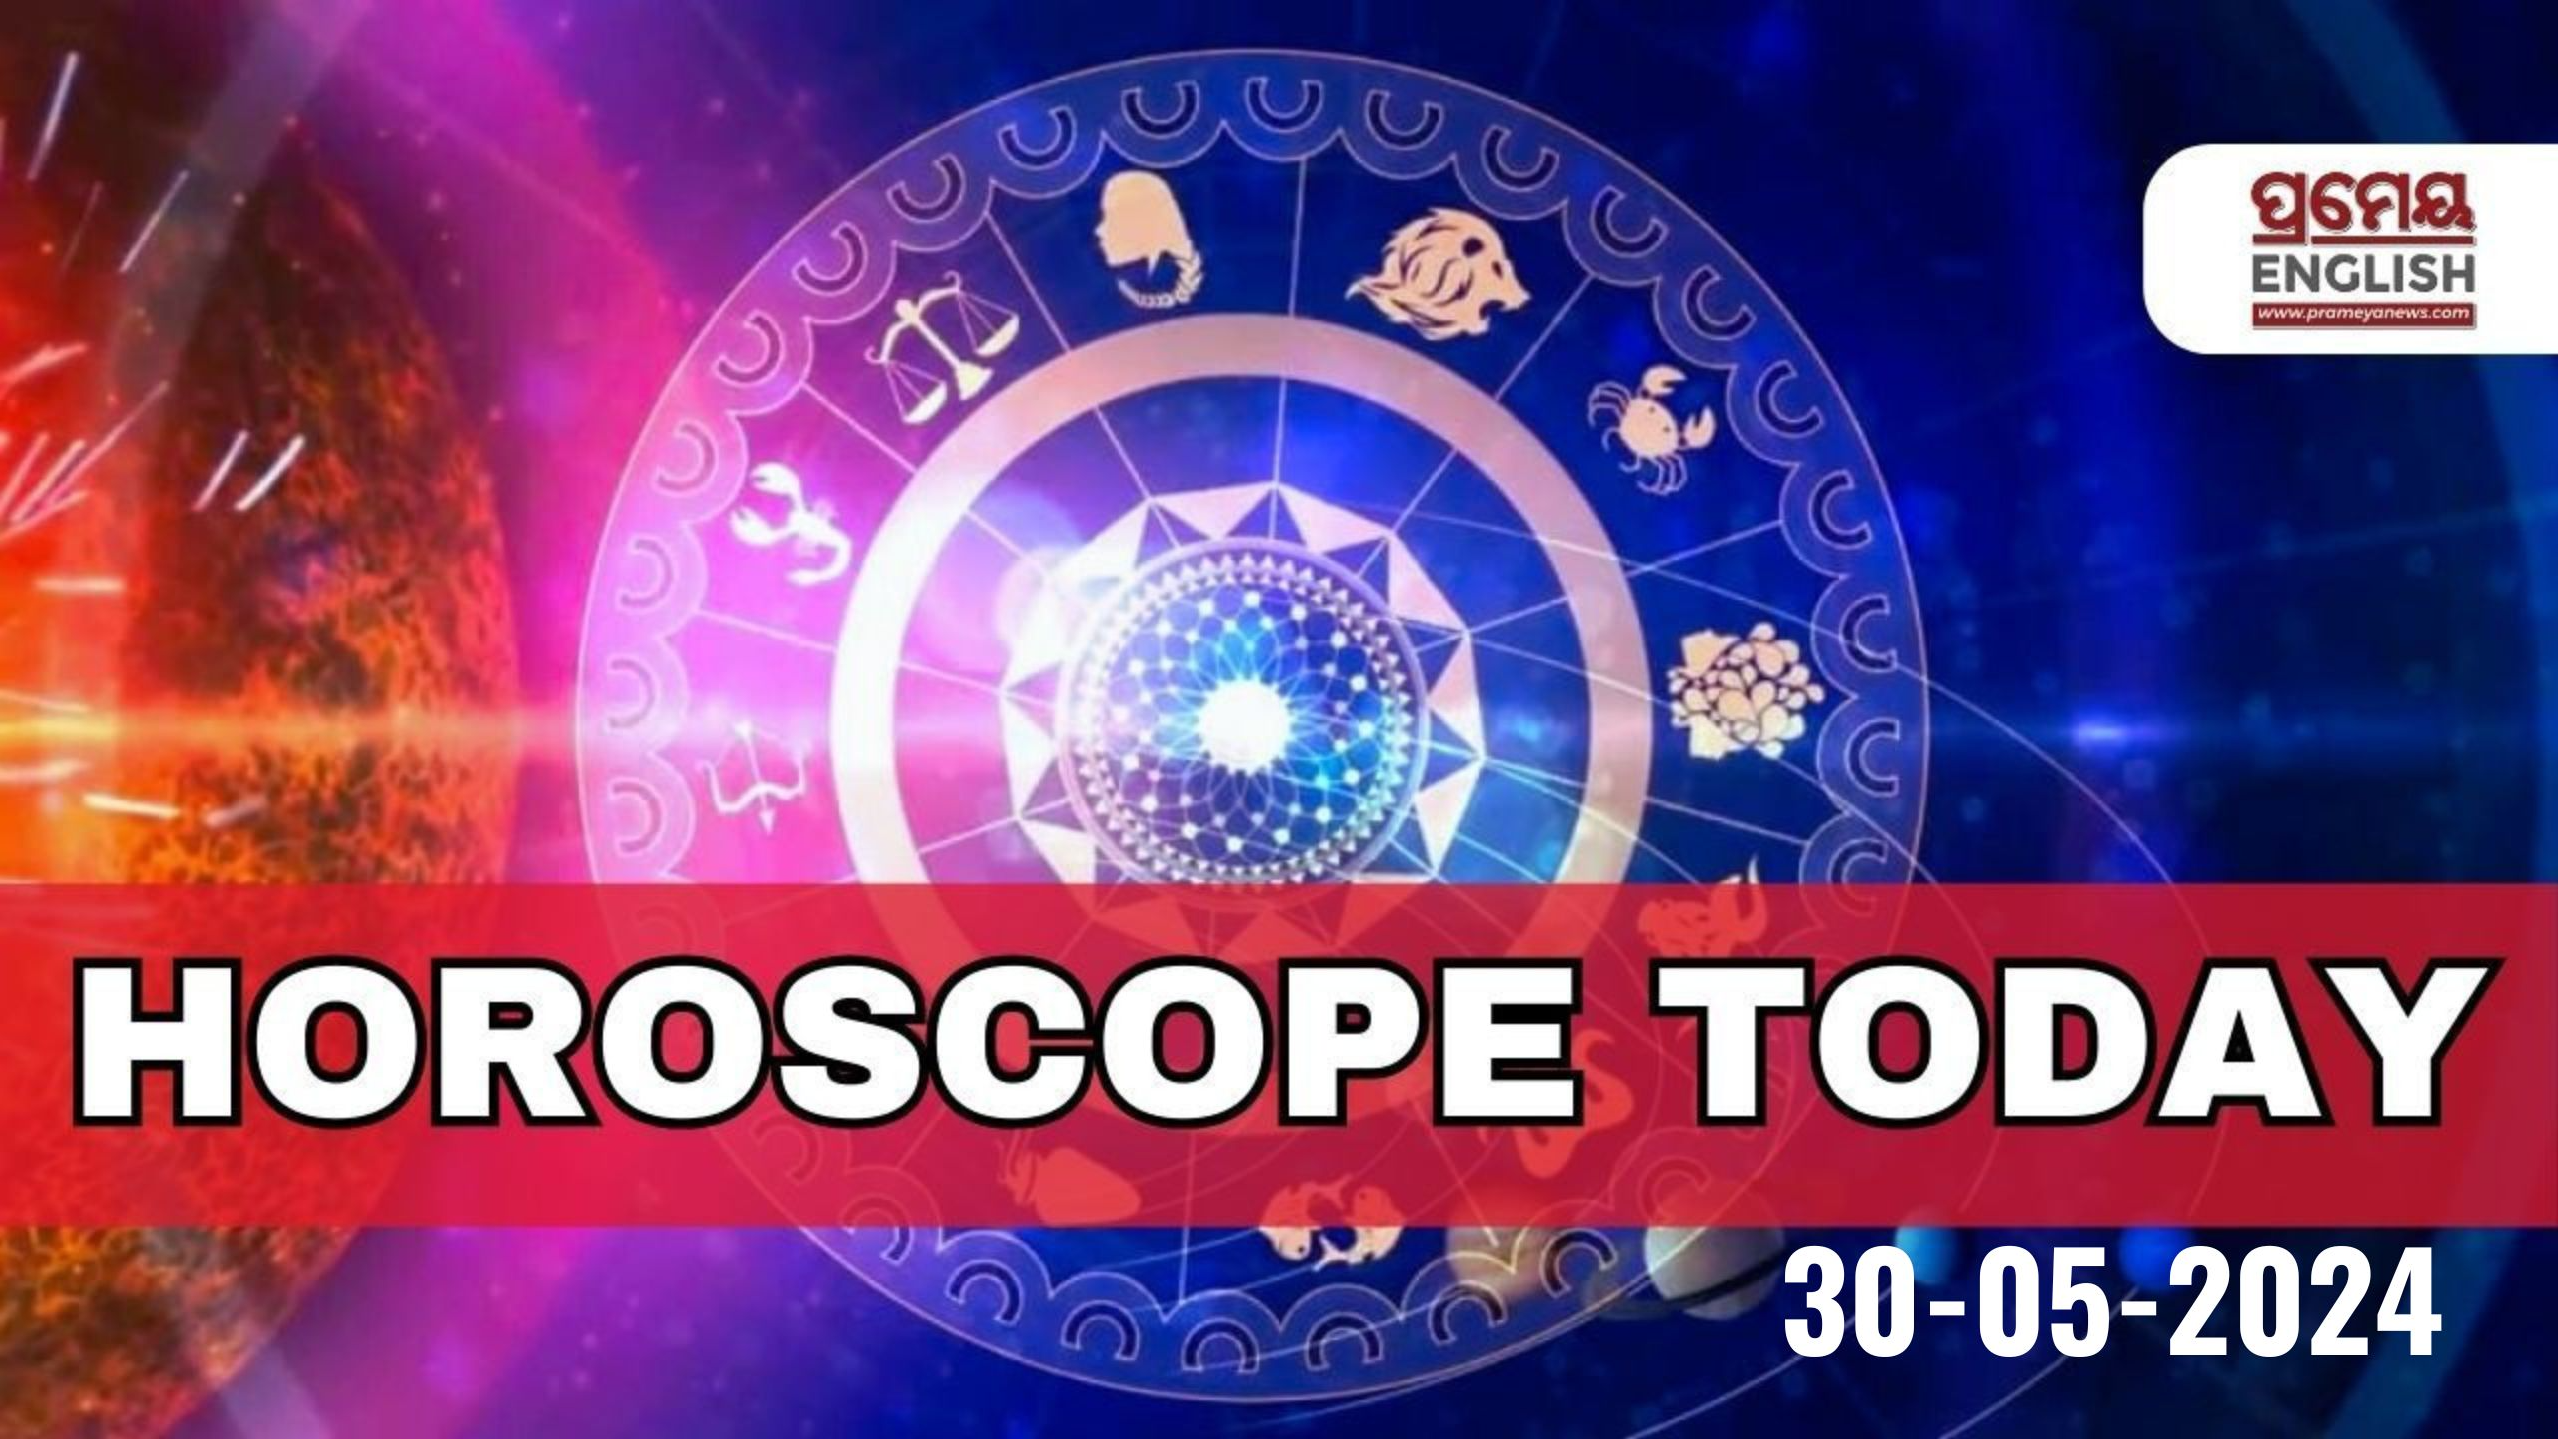 Horoscope Today: Astrological prediction for May 30, 2024